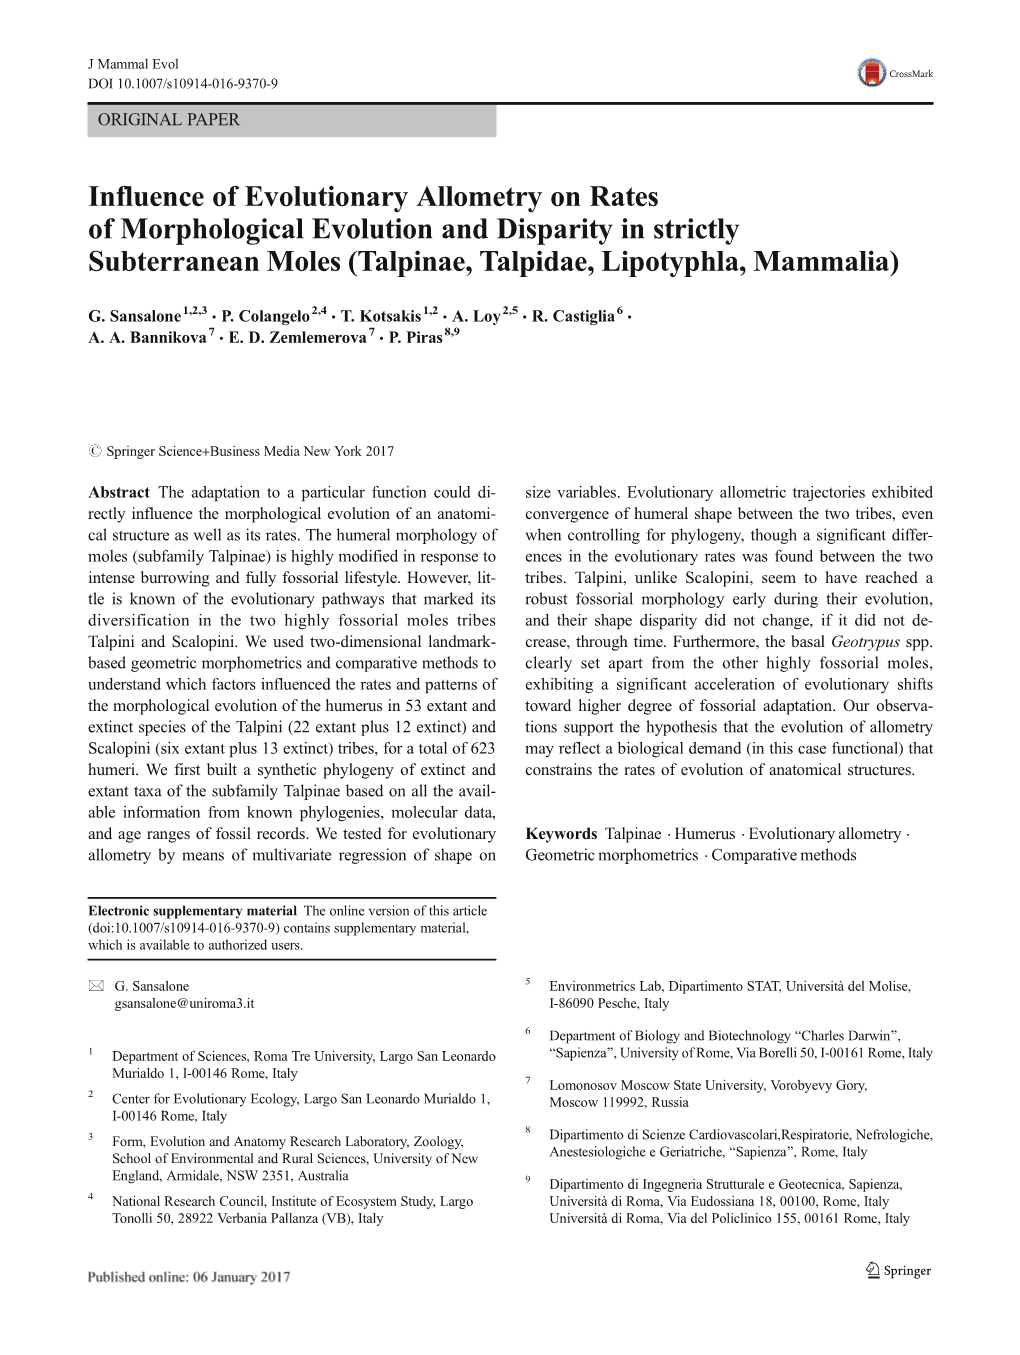 Influence of Evolutionary Allometry on Rates of Morphological Evolution and Disparity in Strictly Subterranean Moles (Talpinae, Talpidae, Lipotyphla, Mammalia)